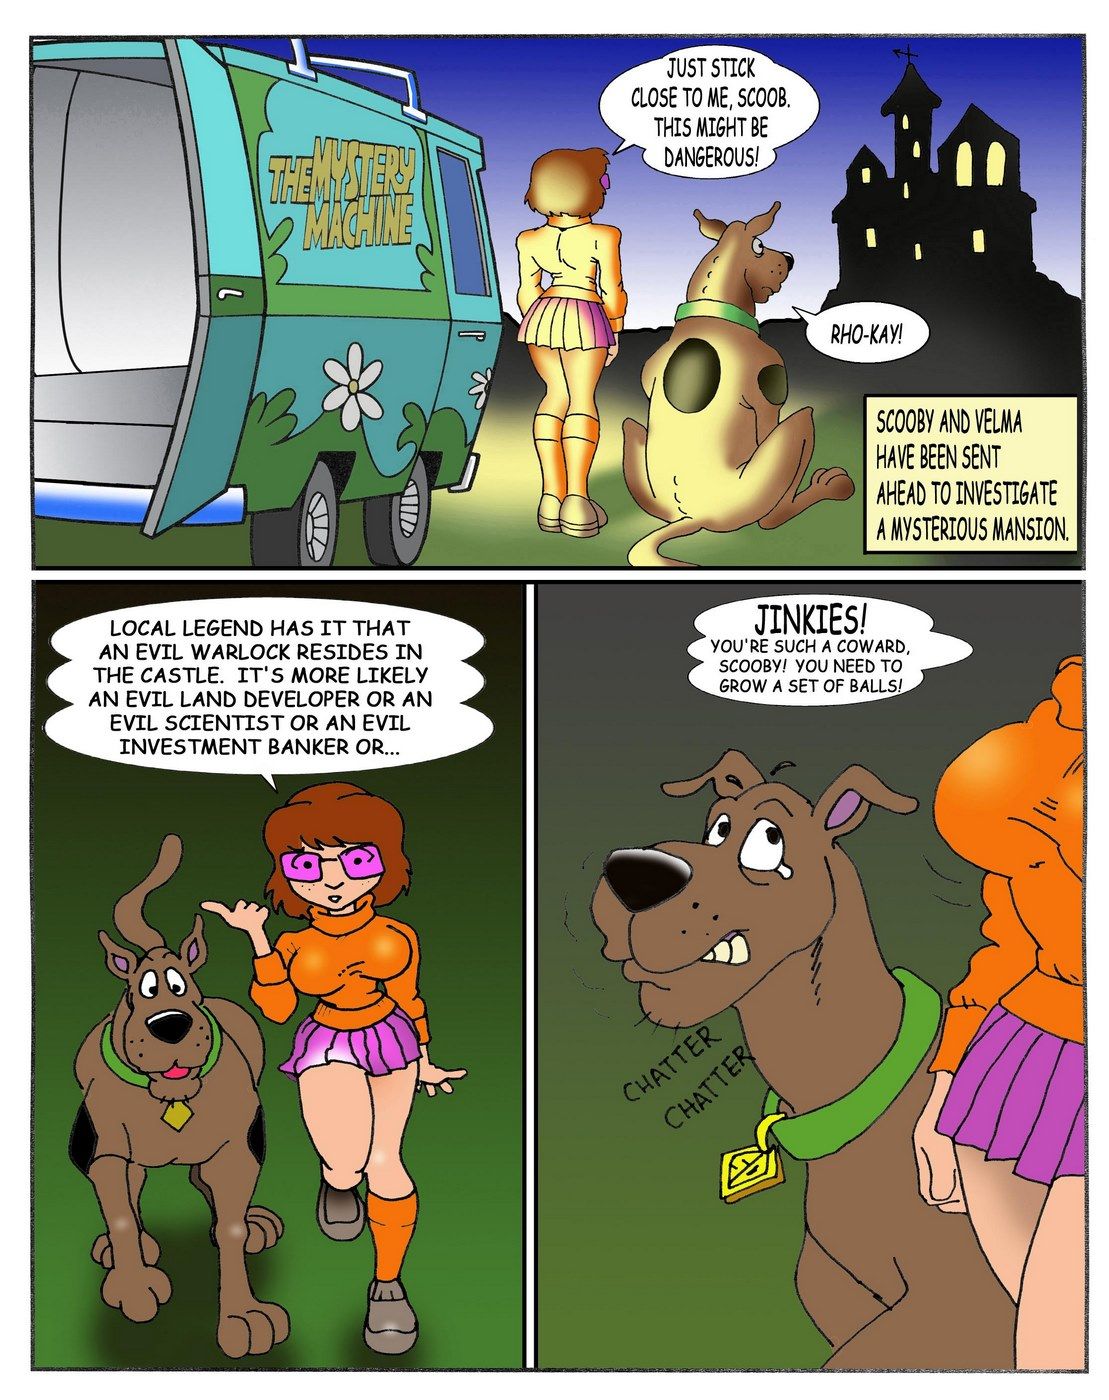 Mystery of the Sexual Weapon (Scooby-Doo) page 2